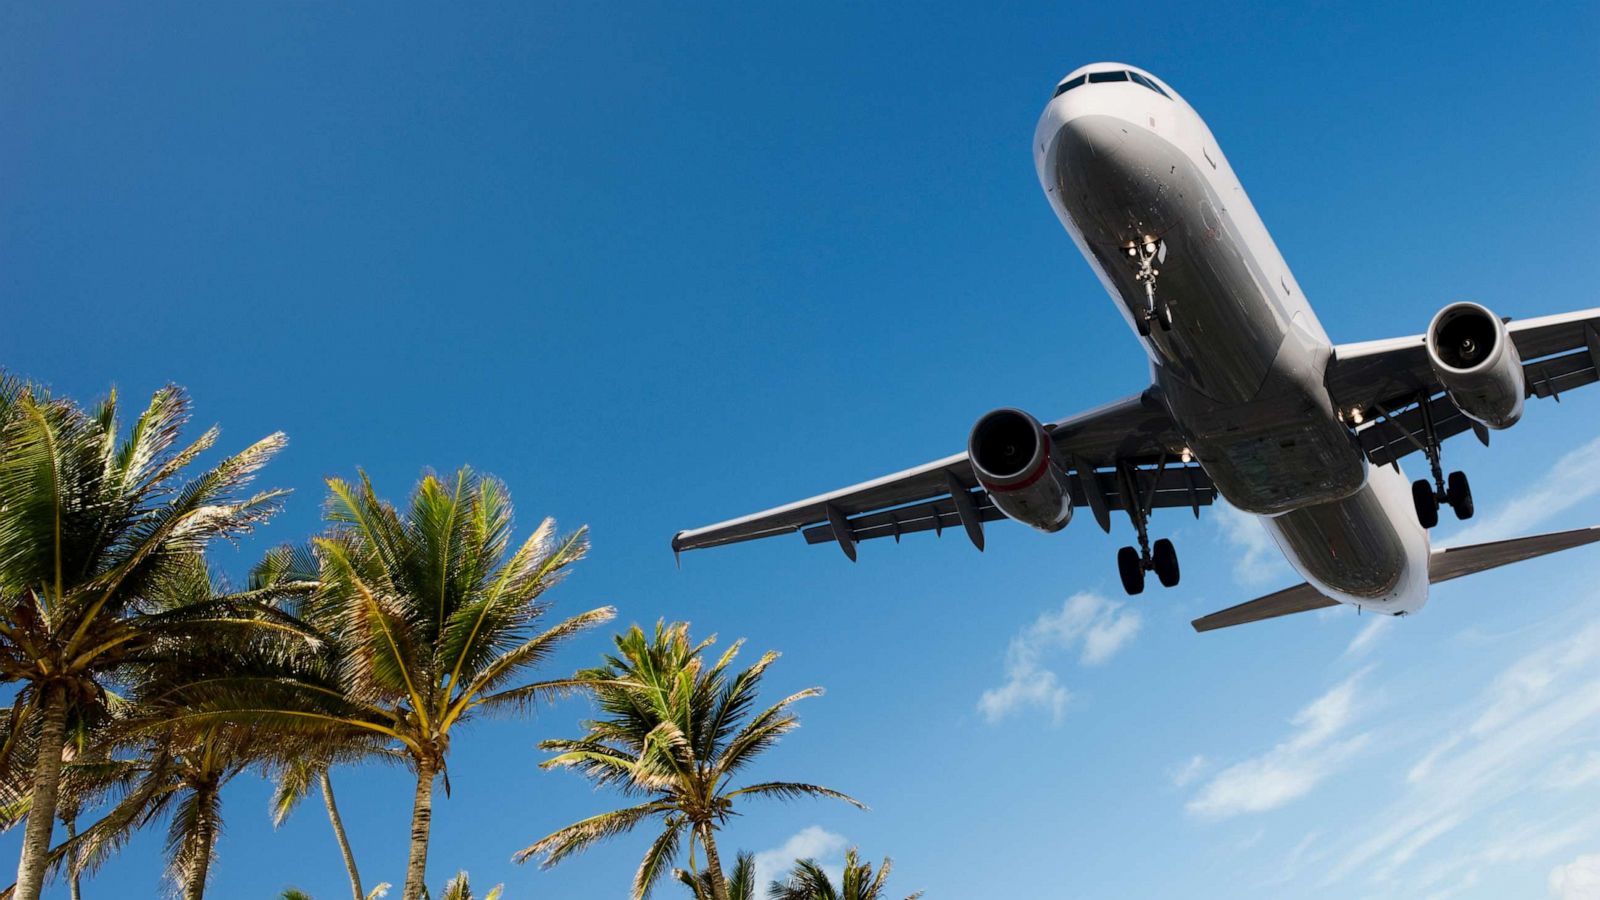 How to Find and Book Cheap Airline Tickets